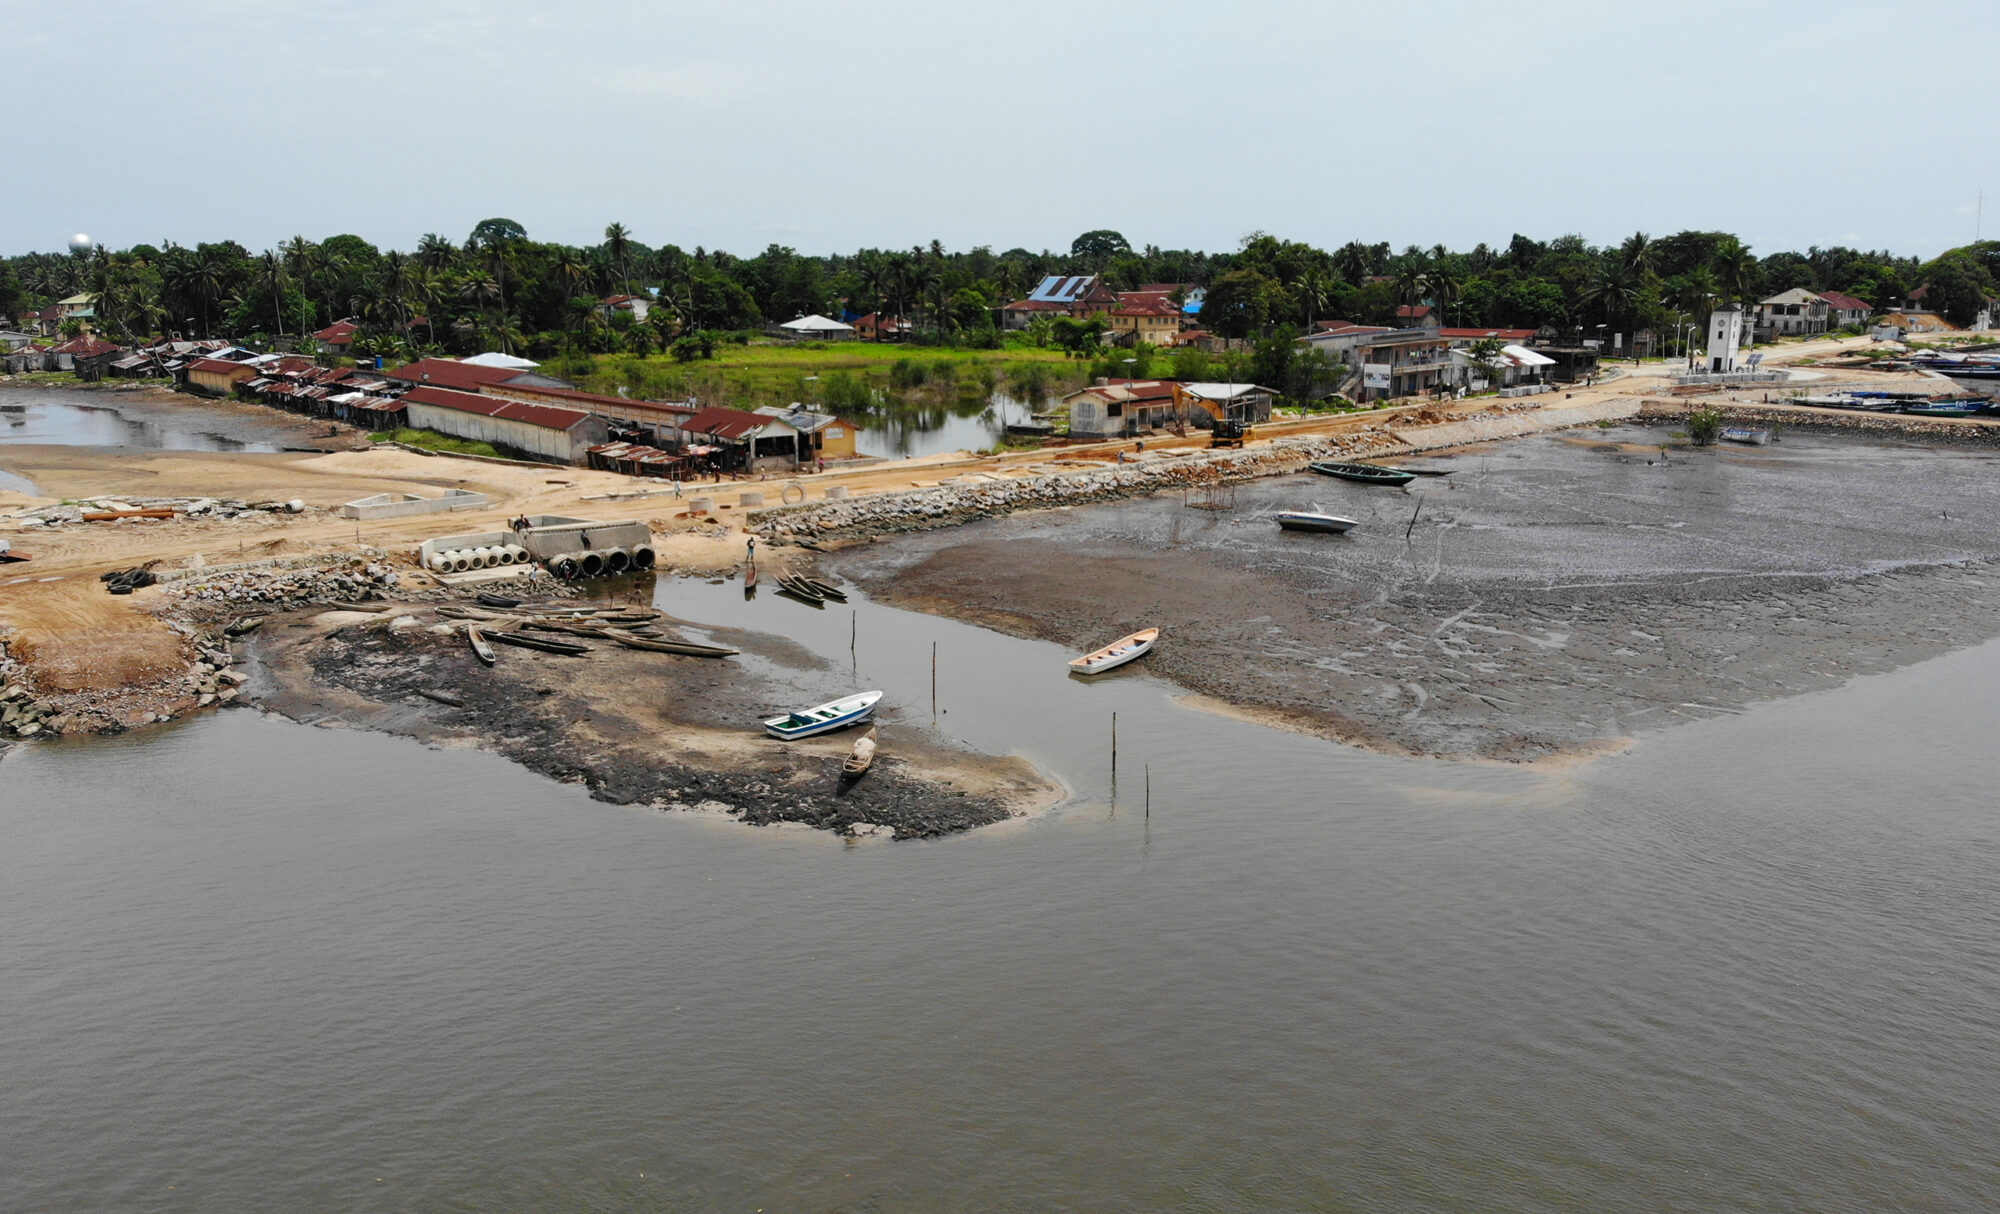 Sea level rise sierra leone: sea wall construction to protect the town of Bonthe on the low-lying island of Sherbro 